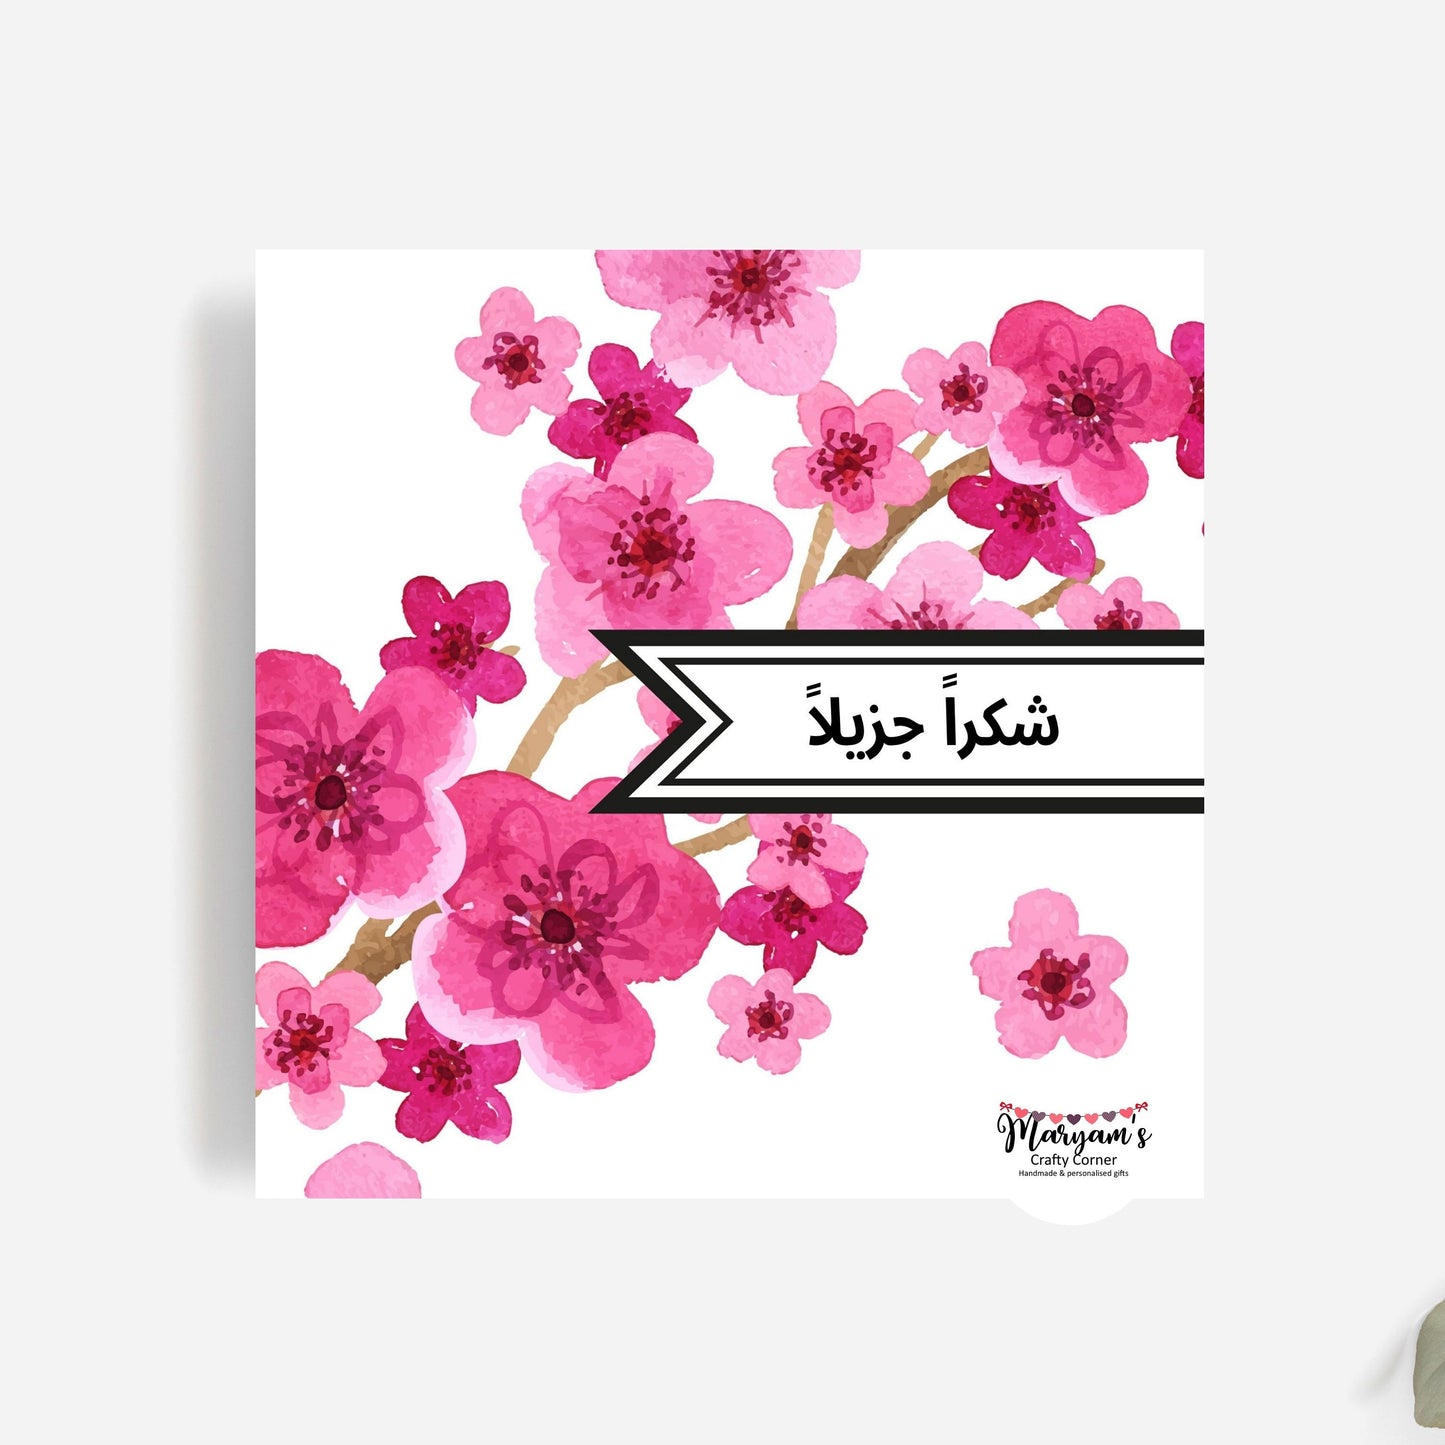 Shukran, Islamic Greeting card saying Thank you pink floral cherry blossom